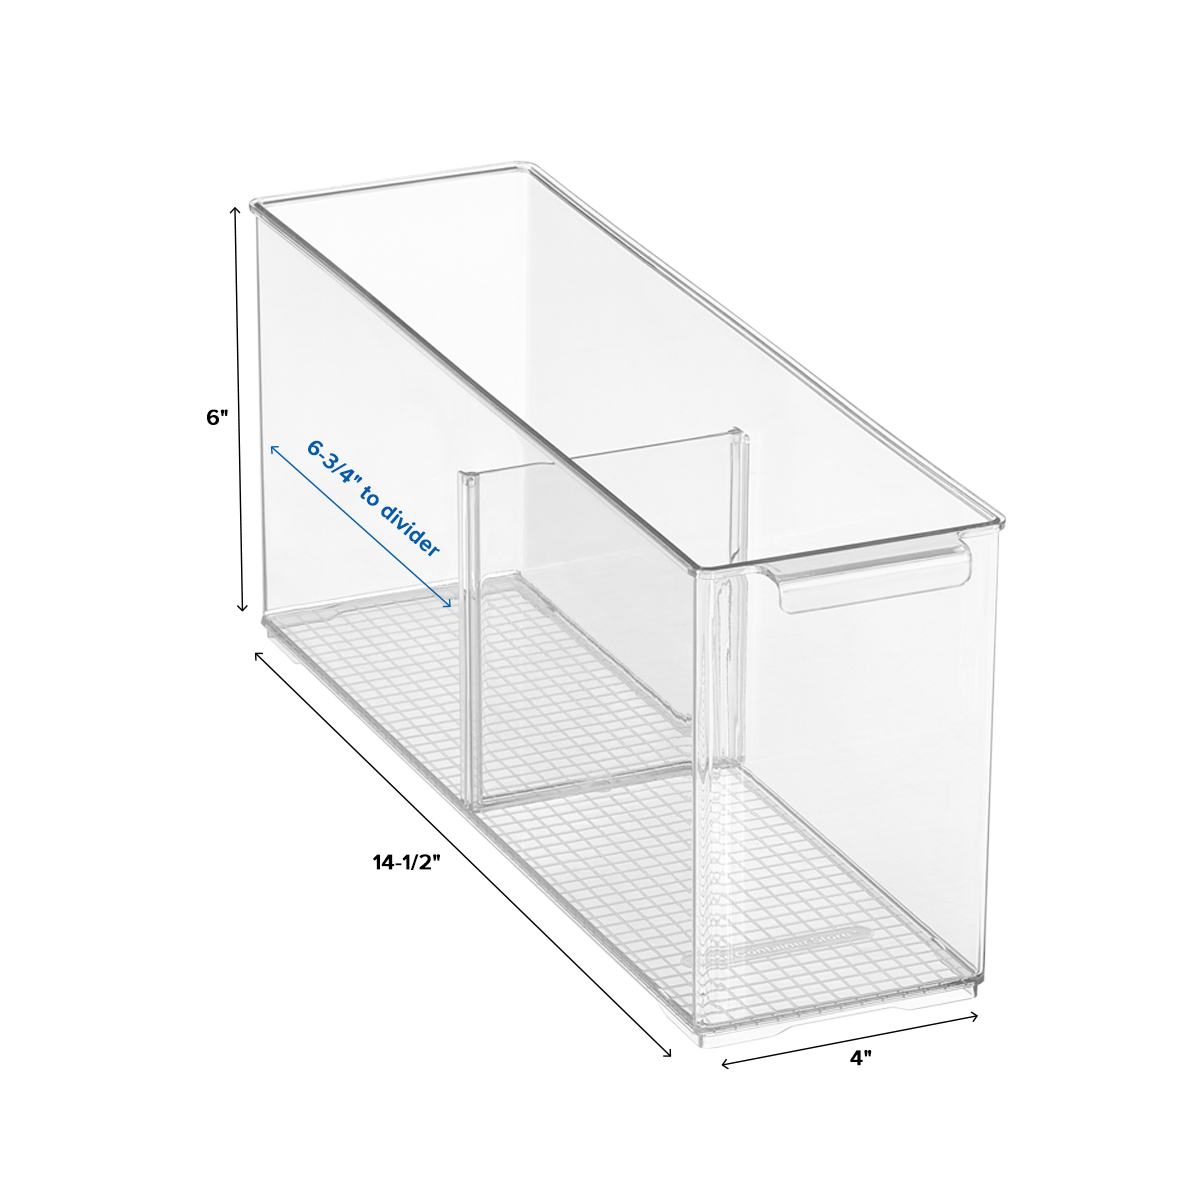 https://www.containerstore.com/catalogimages/478168/10087166_15_Inch_Modular_Pantry_Bin_.jpg